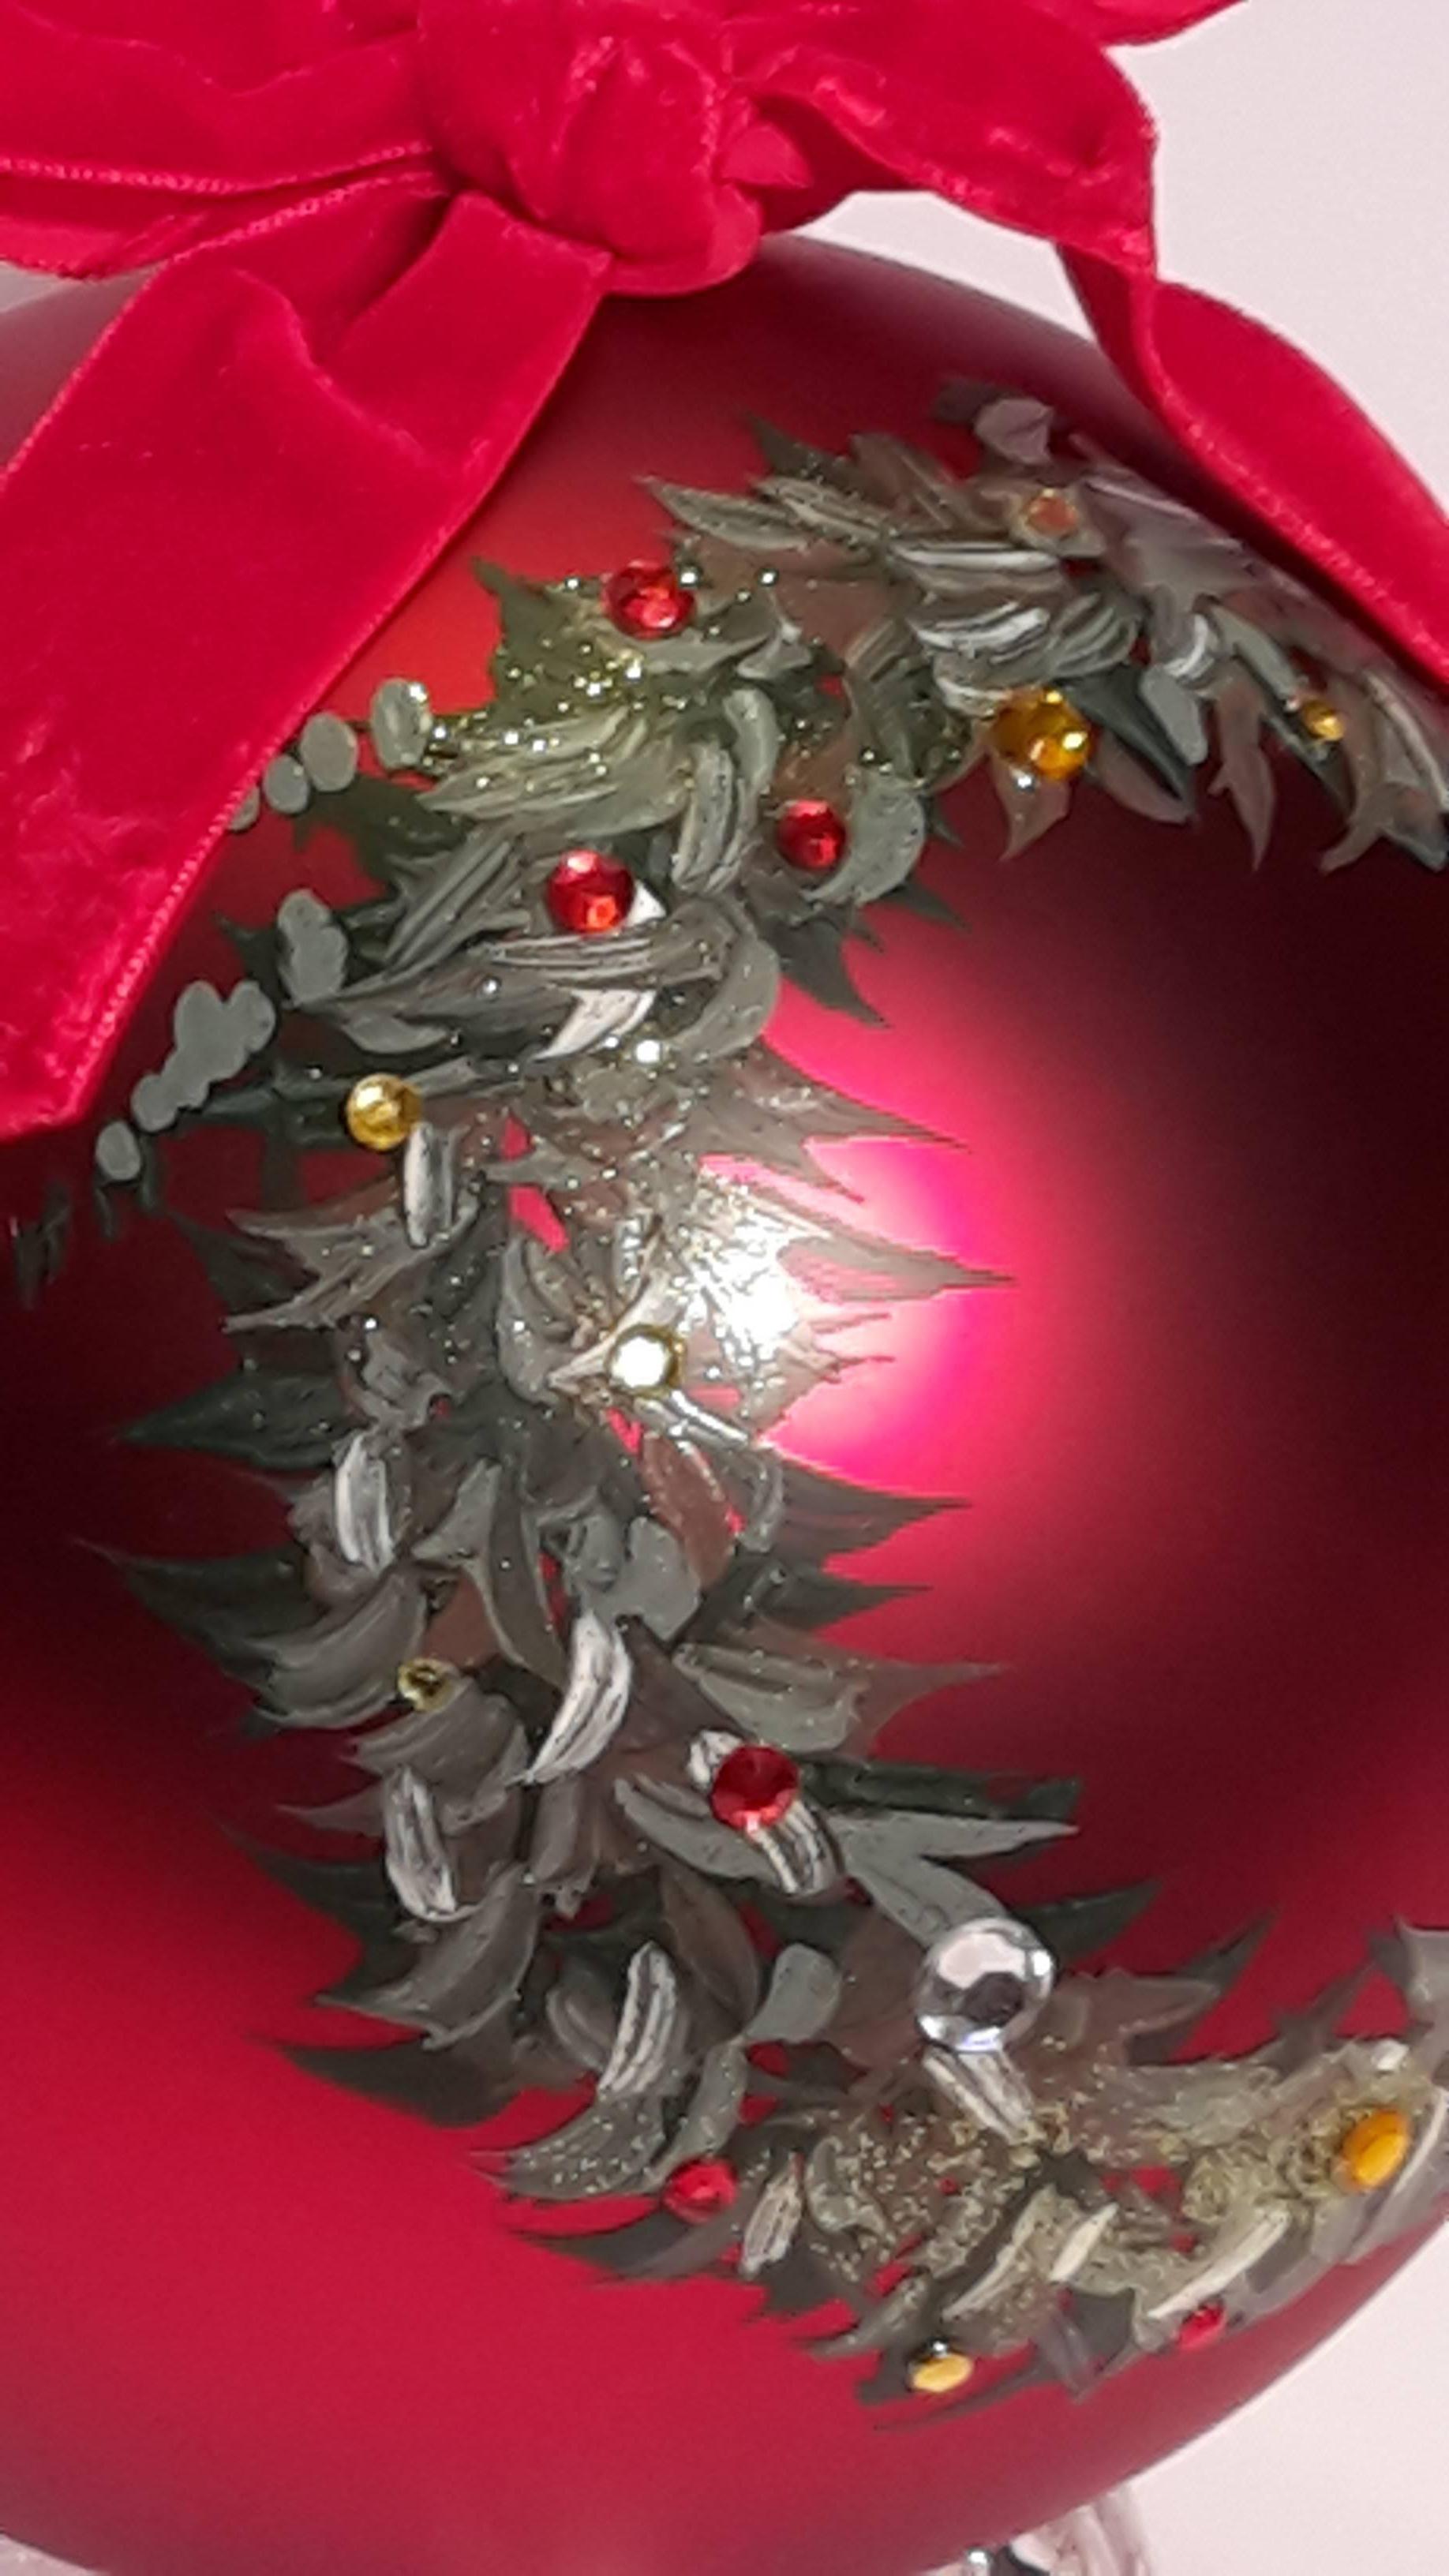 Elegant Christmas ball, large size, beautiful red color, contemporary.
From Germany, all glass. The central wreath decoration is painted and has applied the glitter.
With its own crystal support.